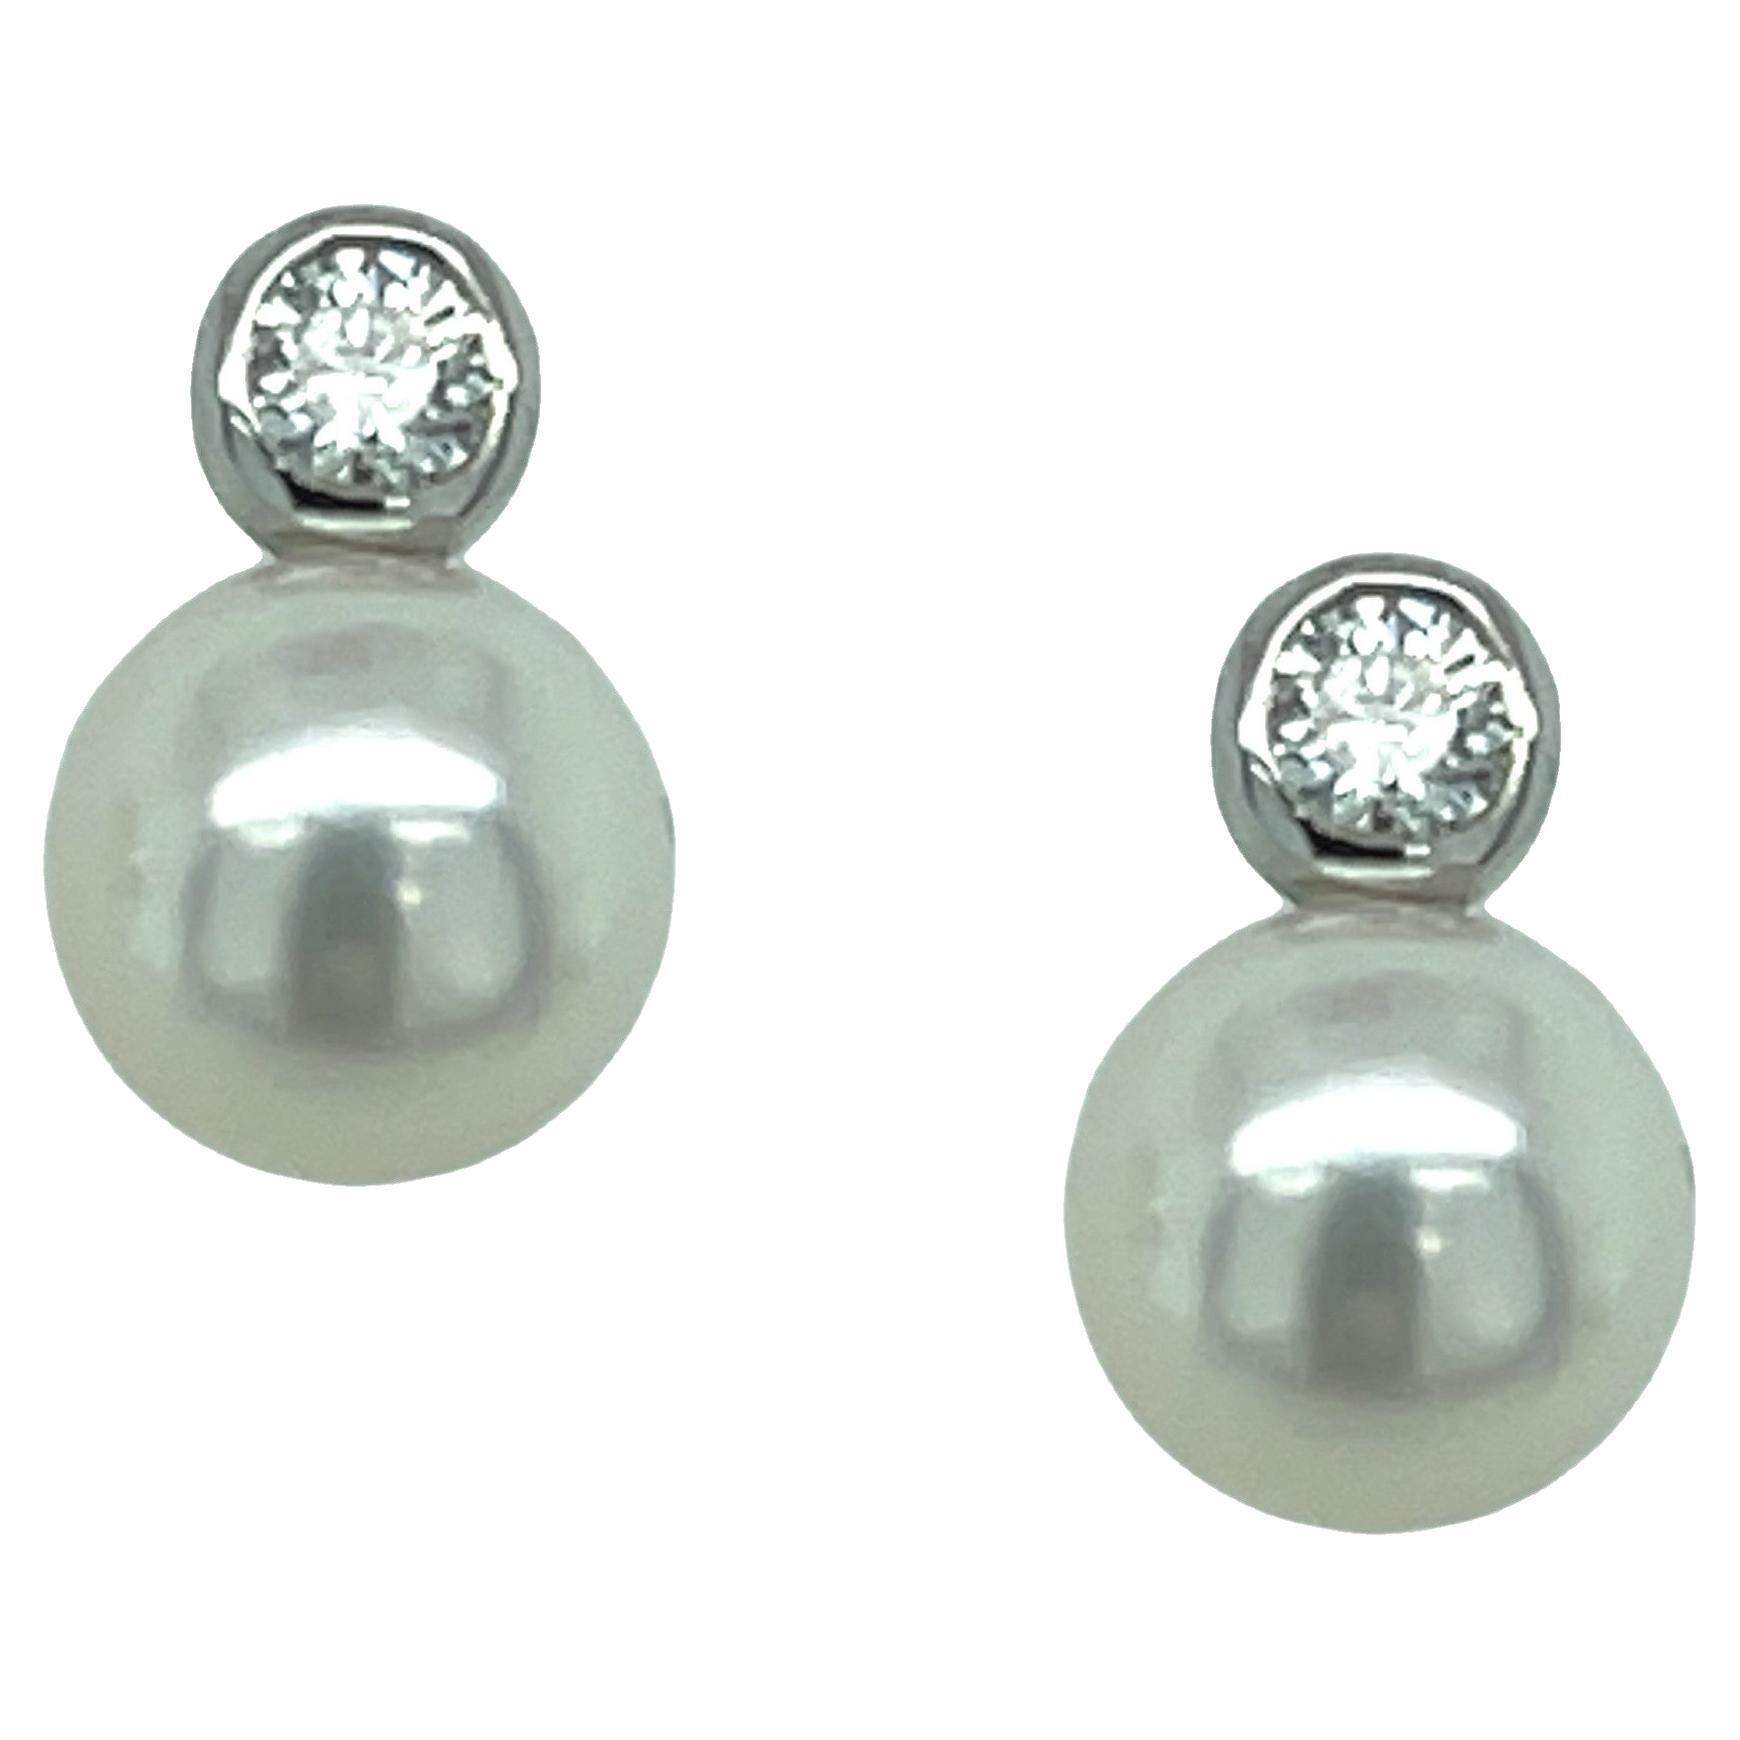 These gorgeous pearl and diamond stud earrings feature a beautifully matched pair of 8.00 mm Akoya saltwater pearls set in 14k white gold. A single 3.30 mm round brilliant cut diamond has been bezel set above each pearl for a more contemporary look